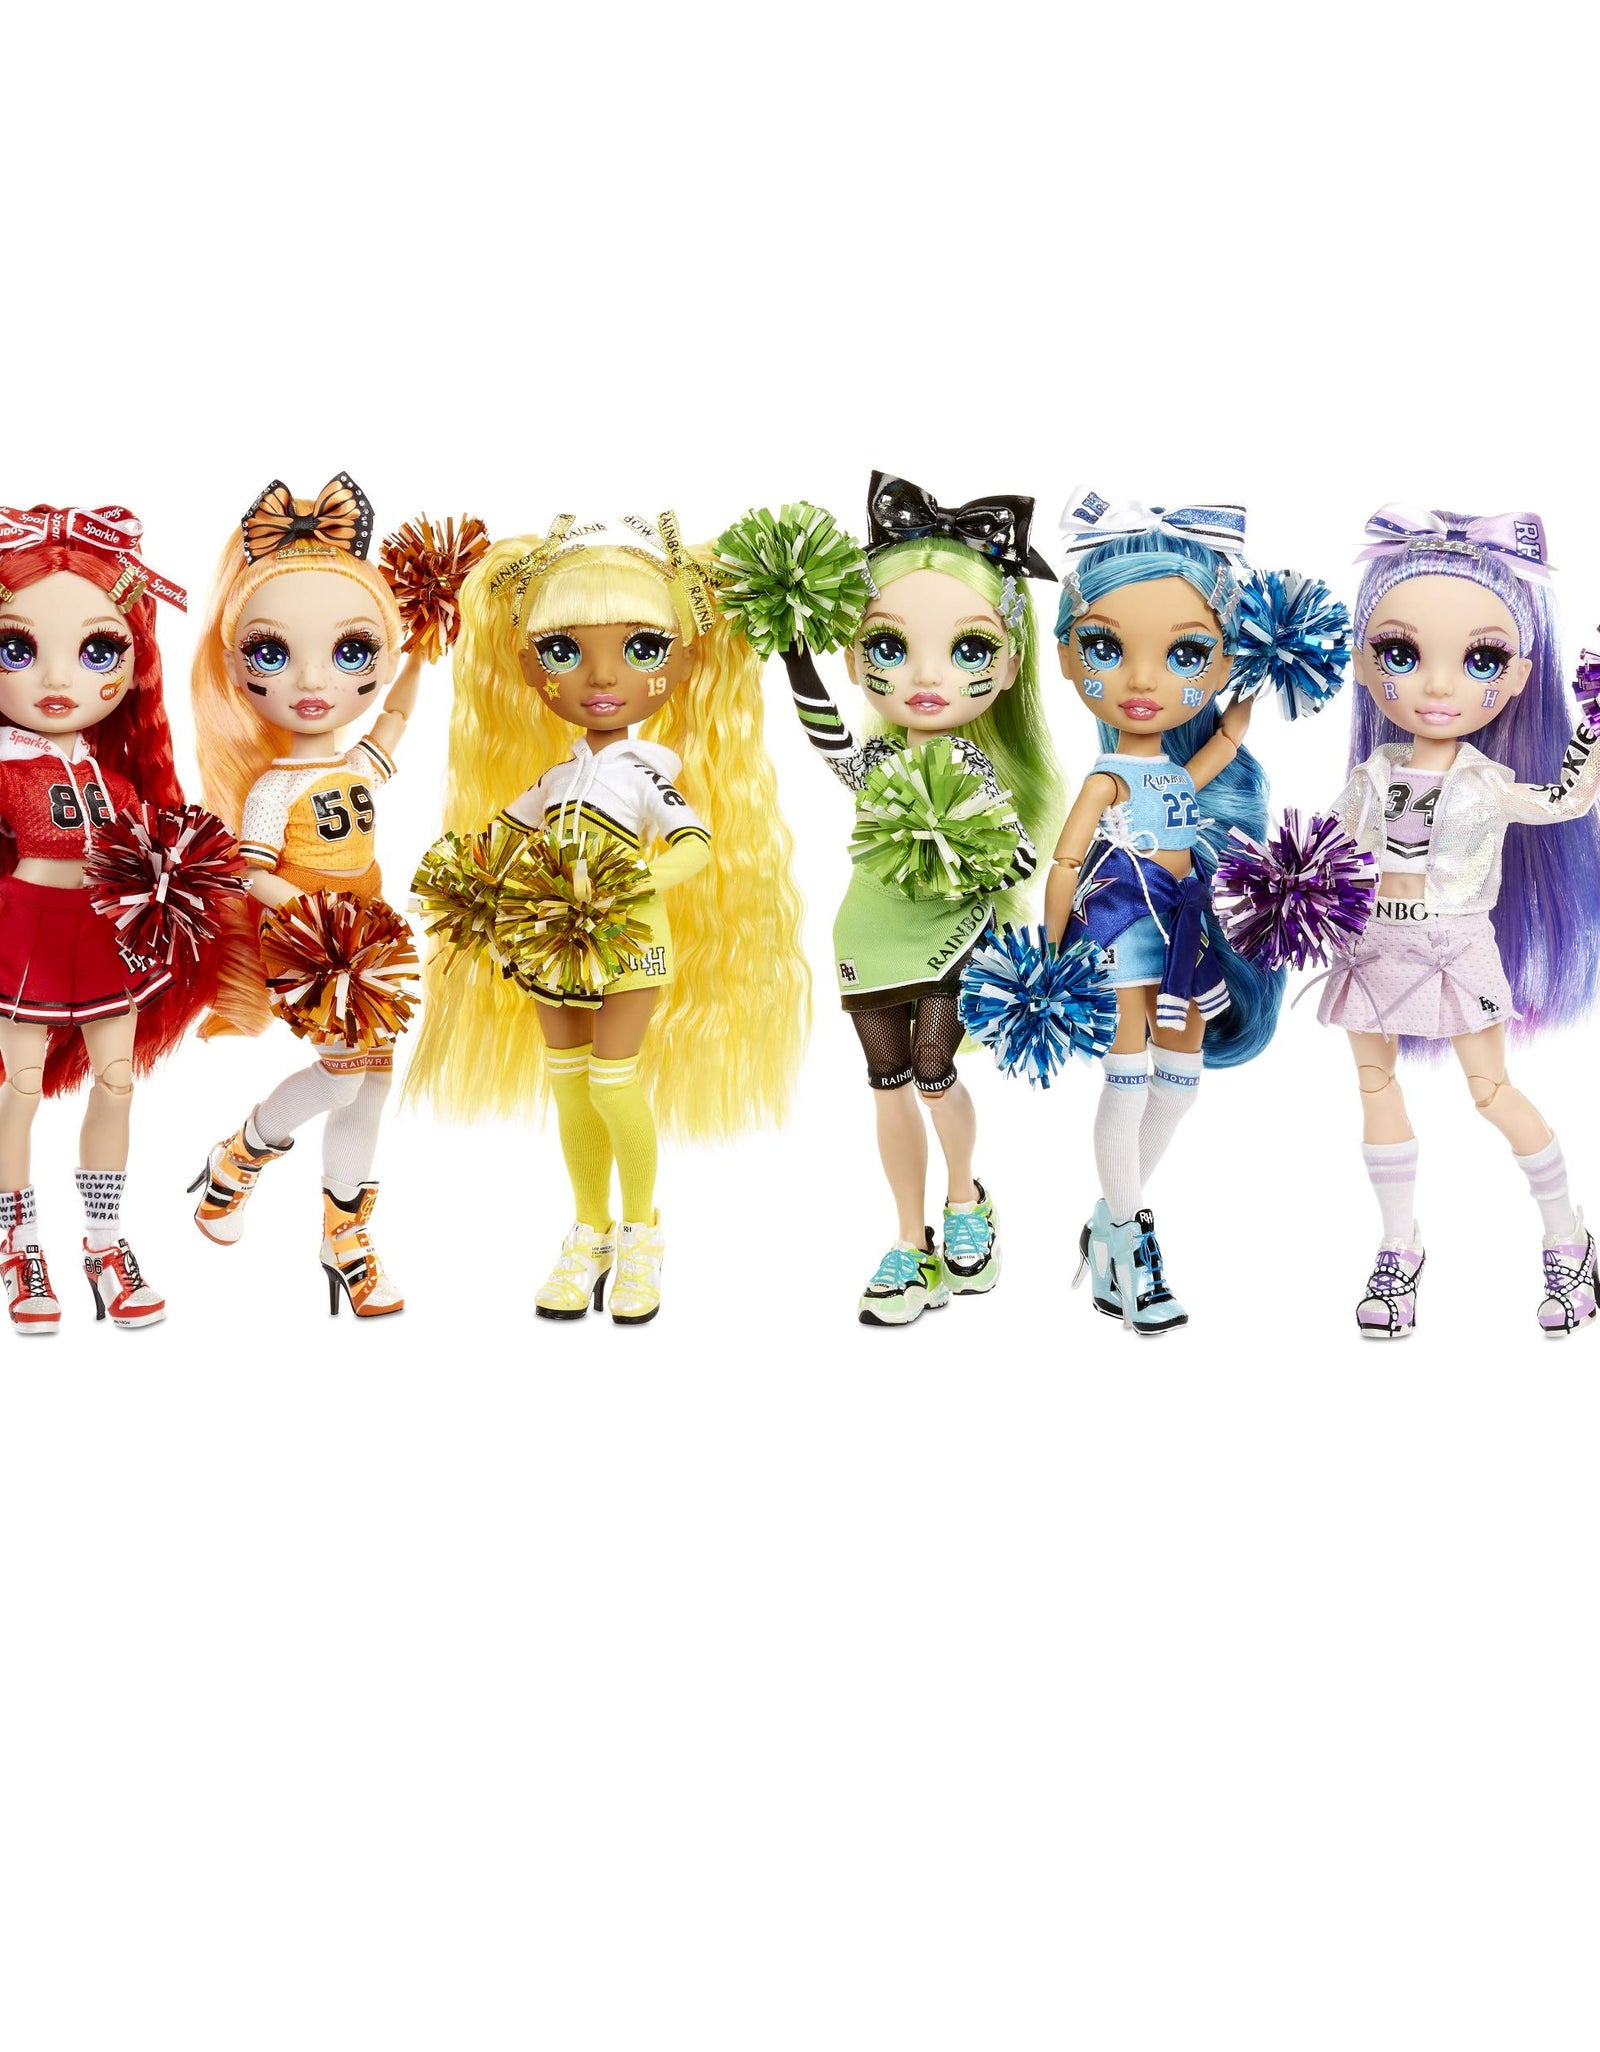 Rainbow High Cheer Ruby Anderson – Red Cheerleader Fashion Doll with 2 Pom Poms and Doll Accessories, Great Gift for Kids 6-12 Years Old